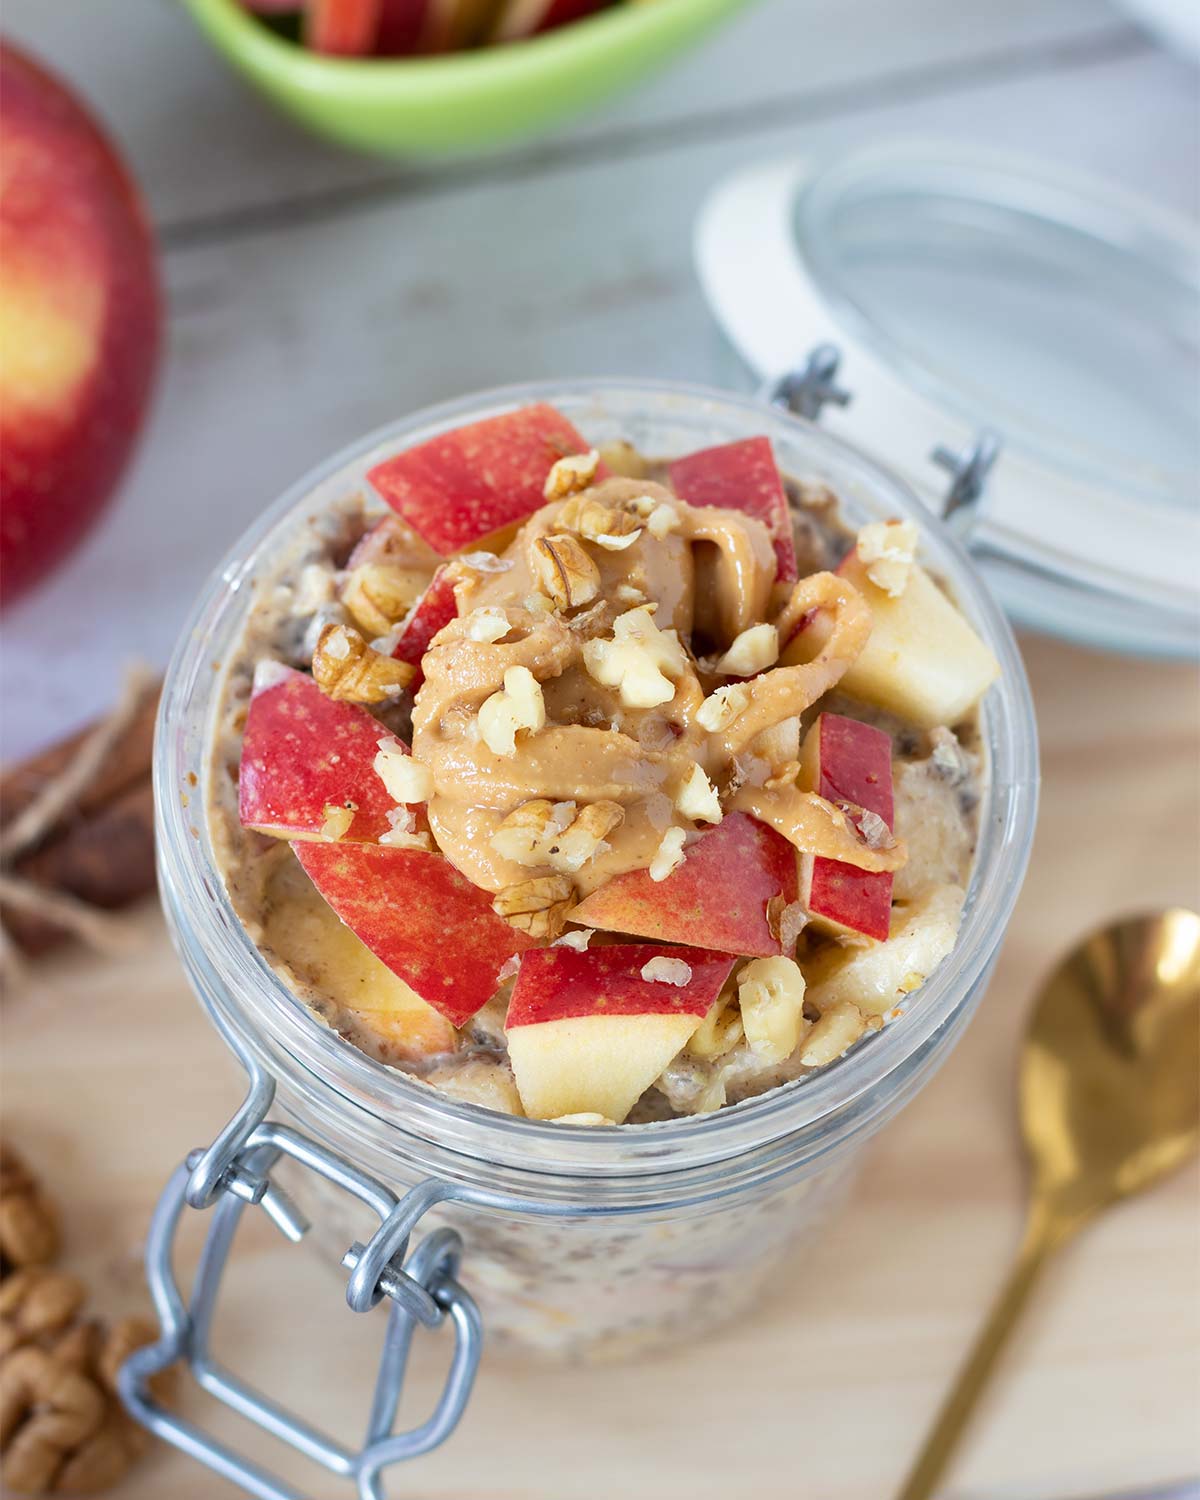 Protein cinnamon apple overnight oats in a jar with peanut butter, chia seeds, and other healthy ingredients for simple fall breakfast